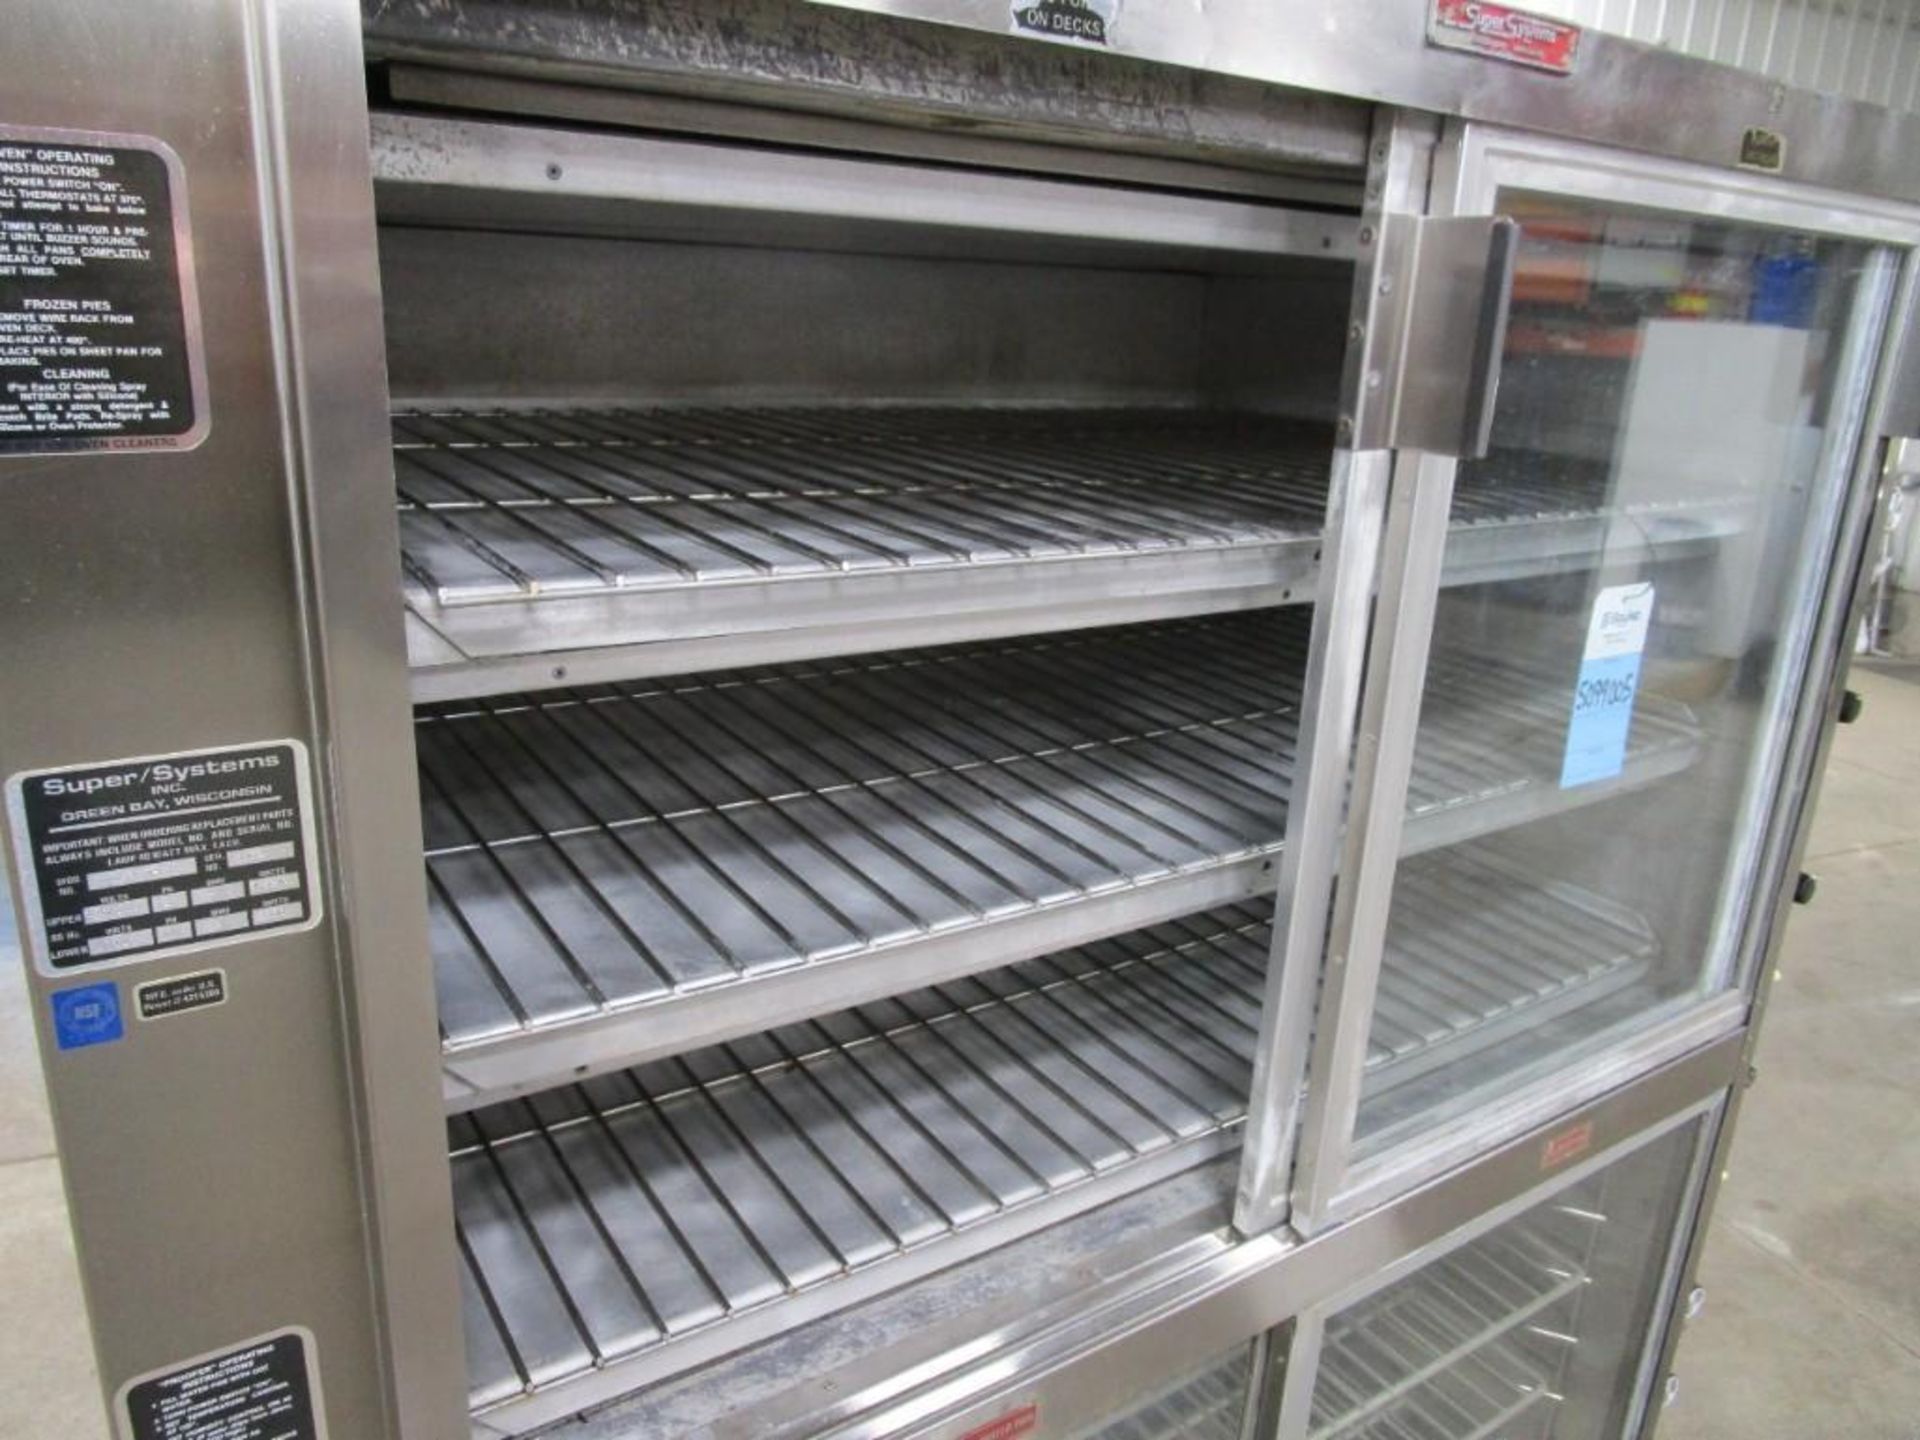 Super Systems Inc. Deck Oven Proofer Combo - Image 9 of 22